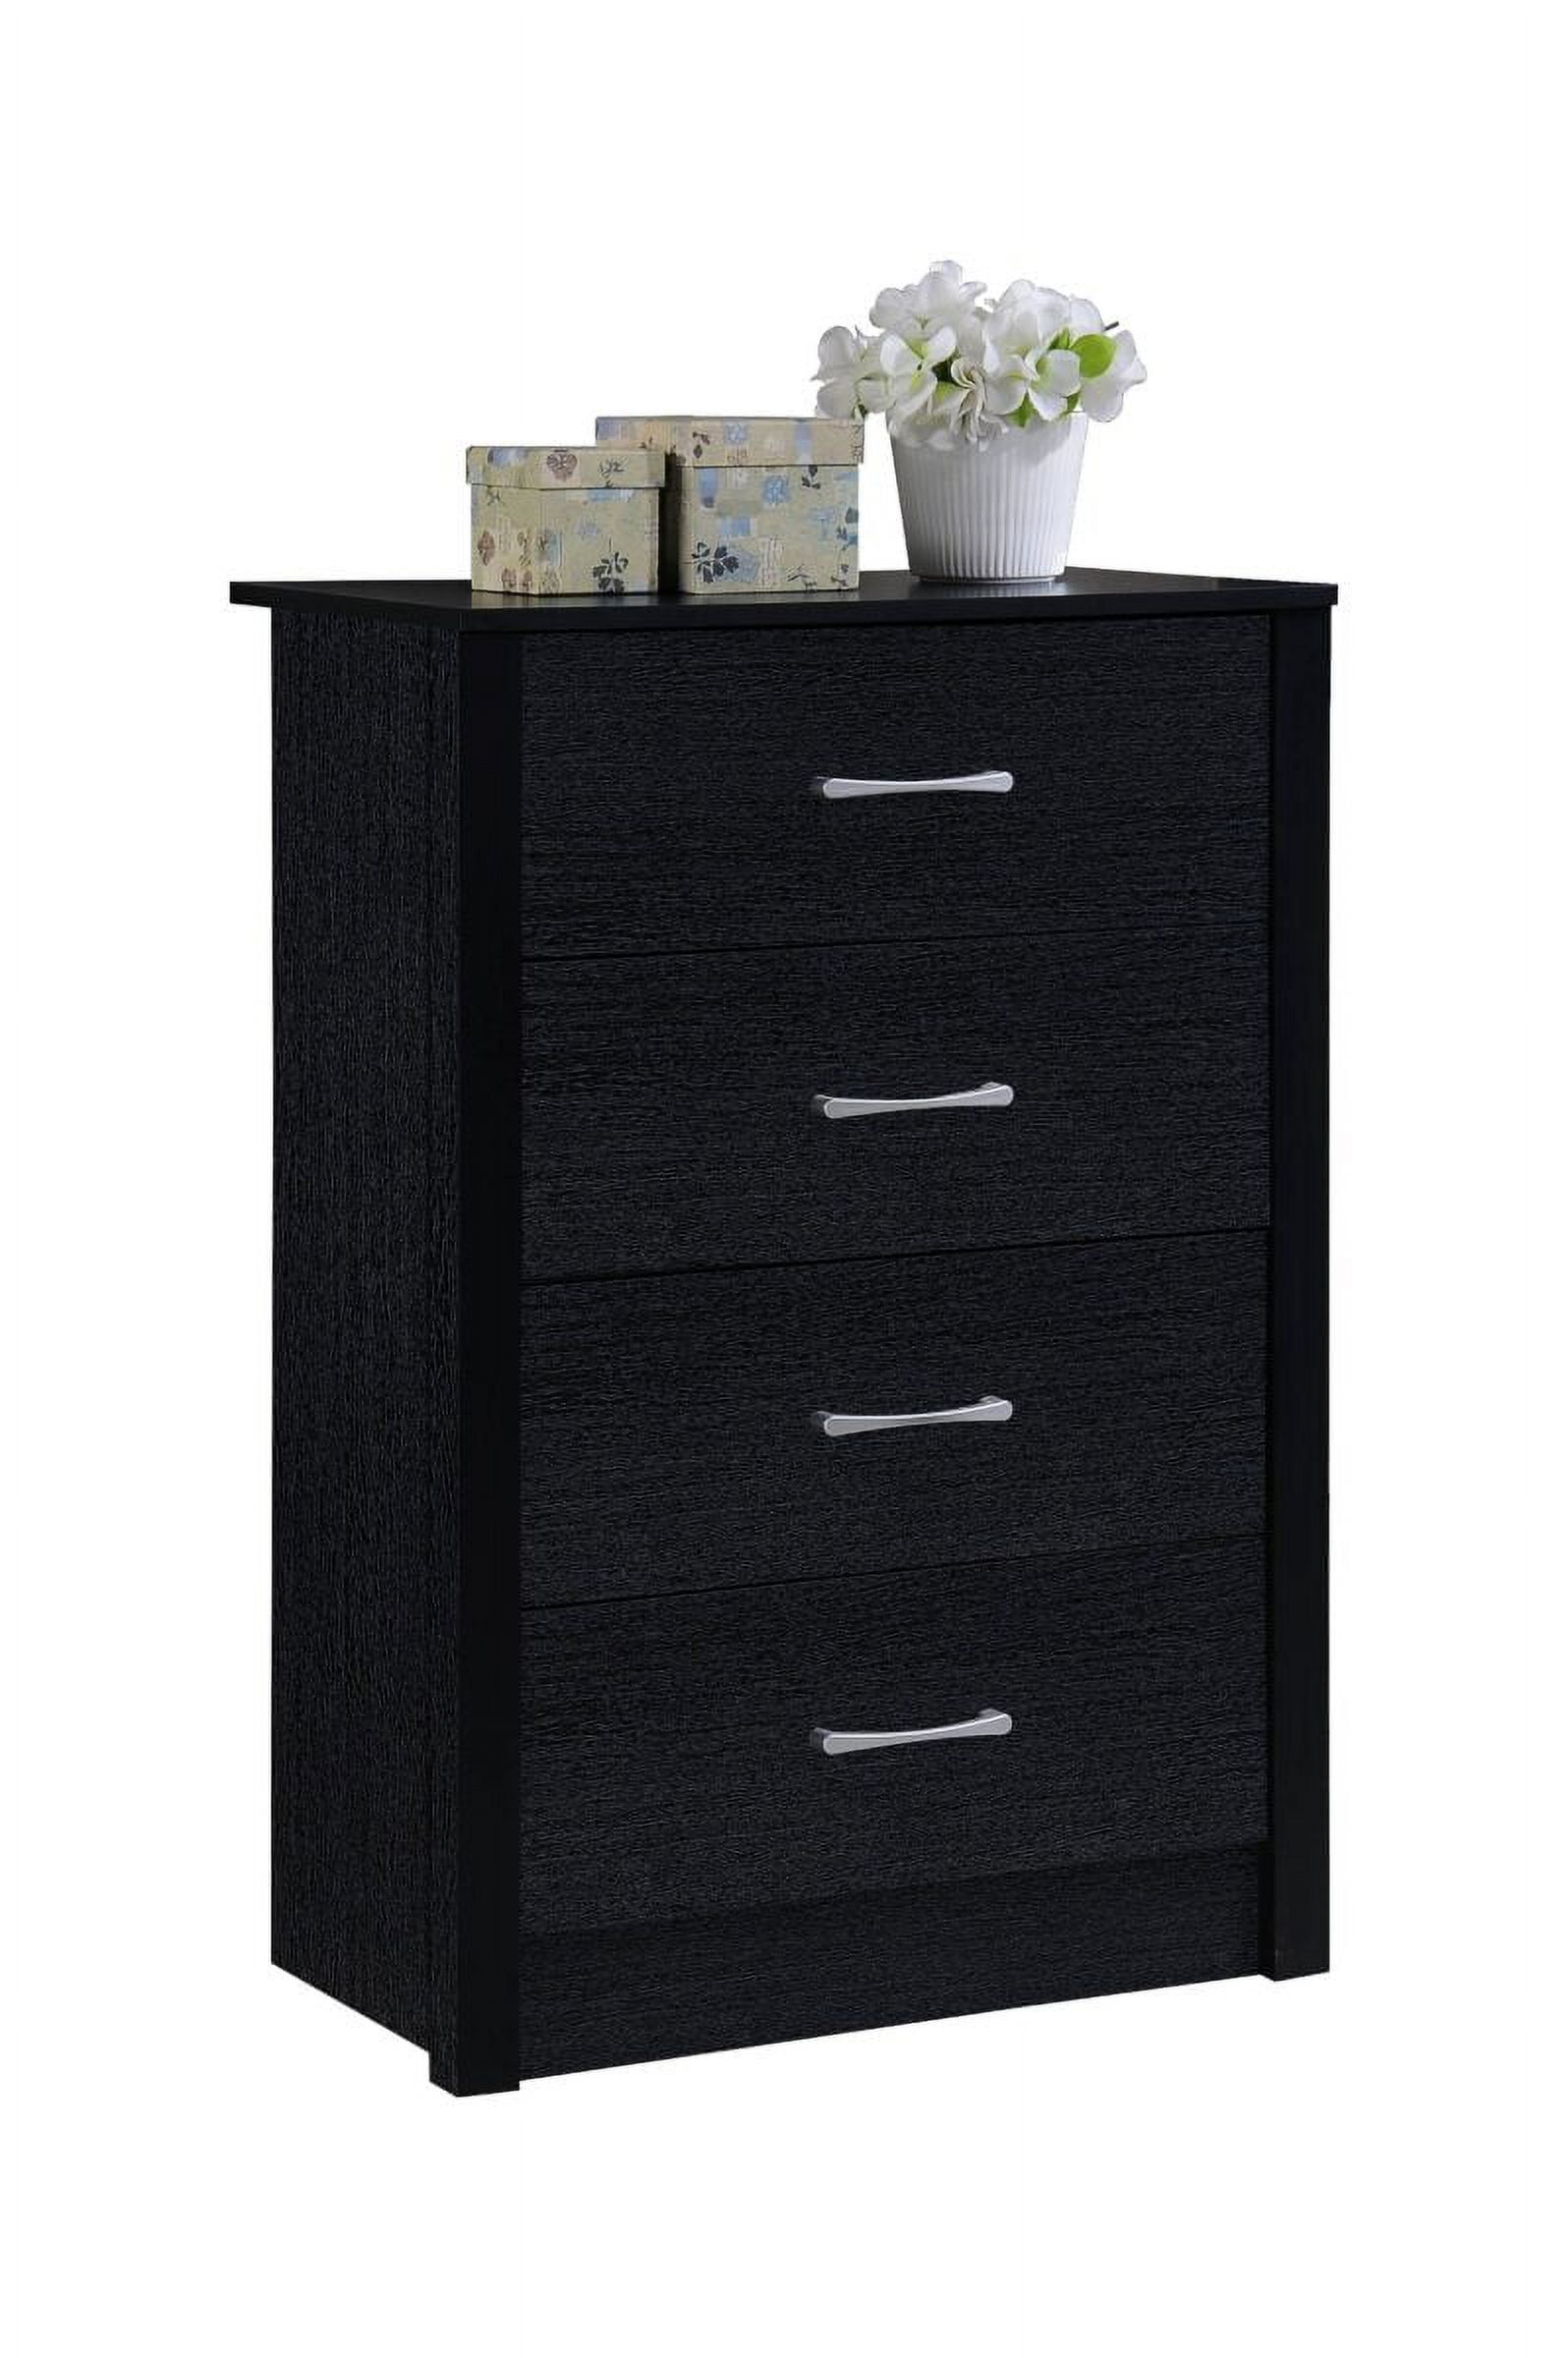 Sleek Black Contemporary 4-Drawer Chest with Metal Glides